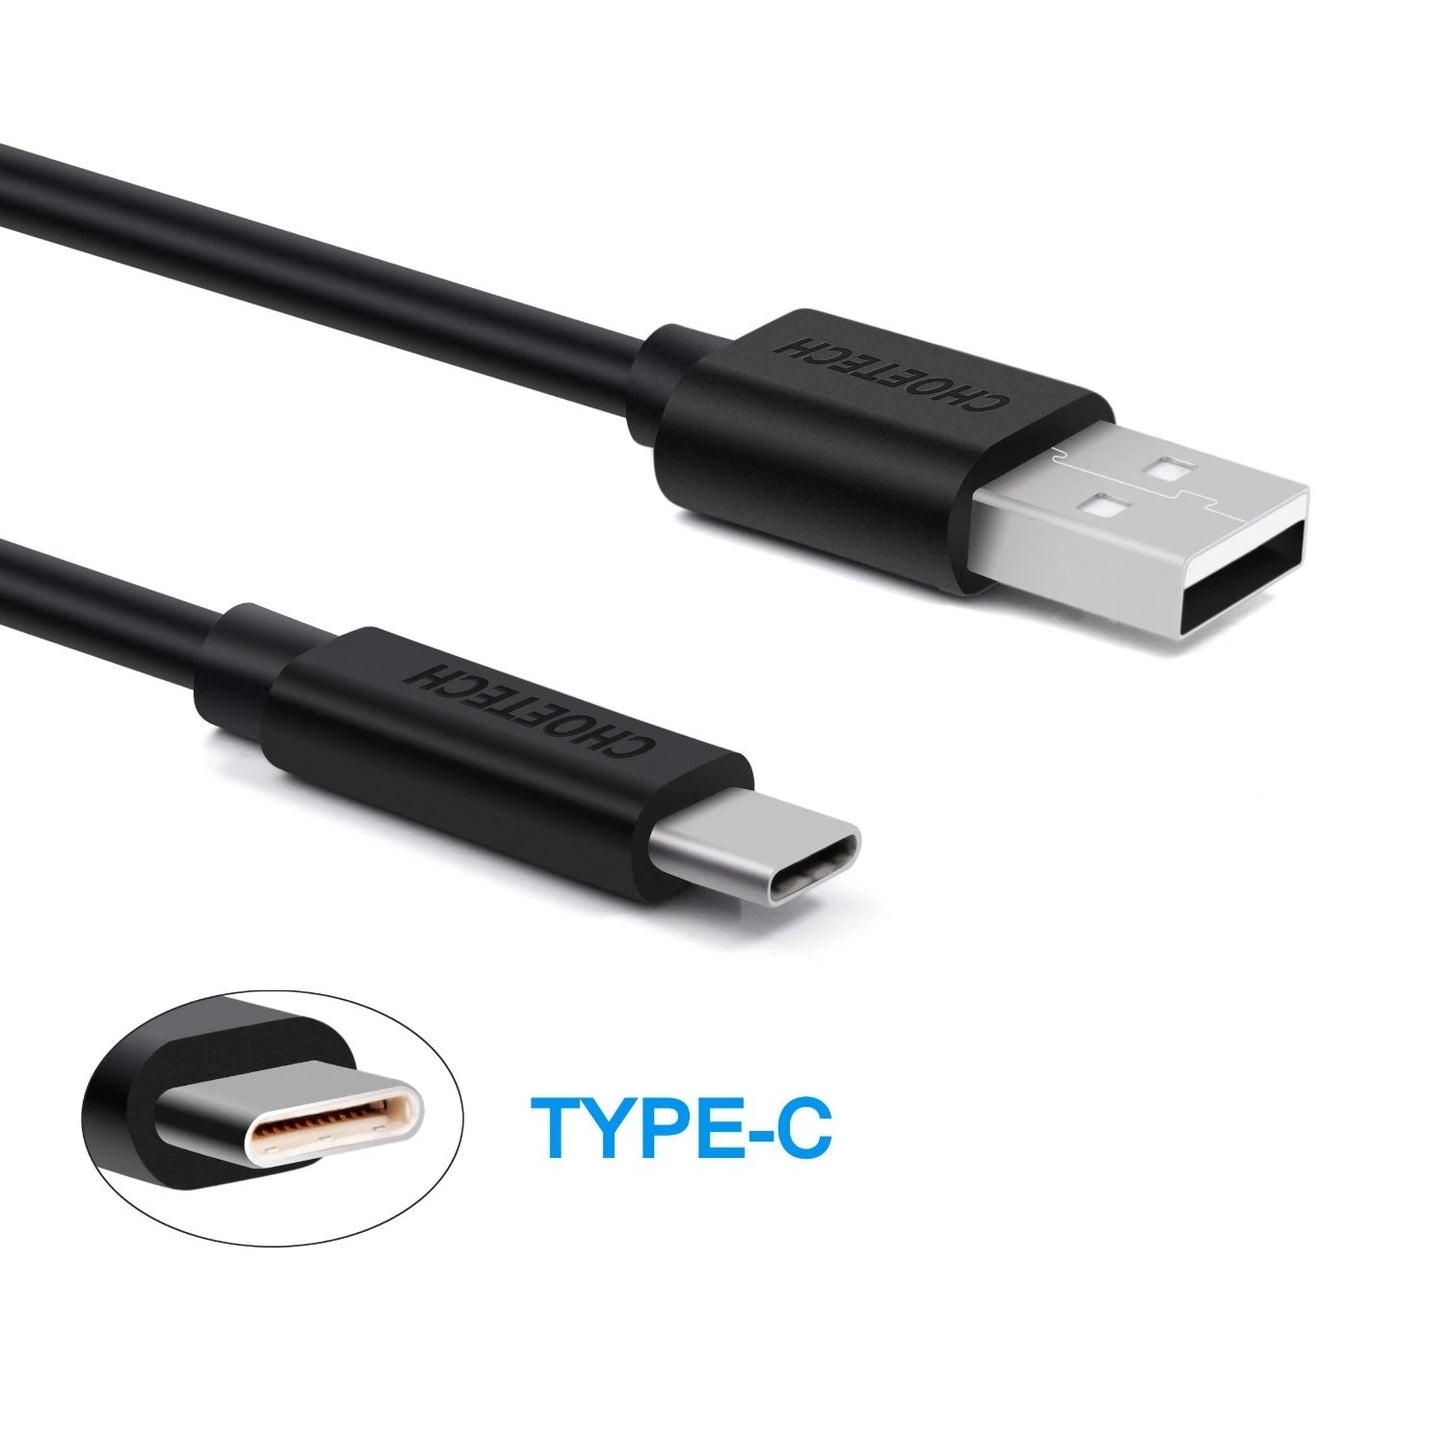 CHOETECH AC0004 USB-A to USB-C Charge & Sync Cable 3M Black